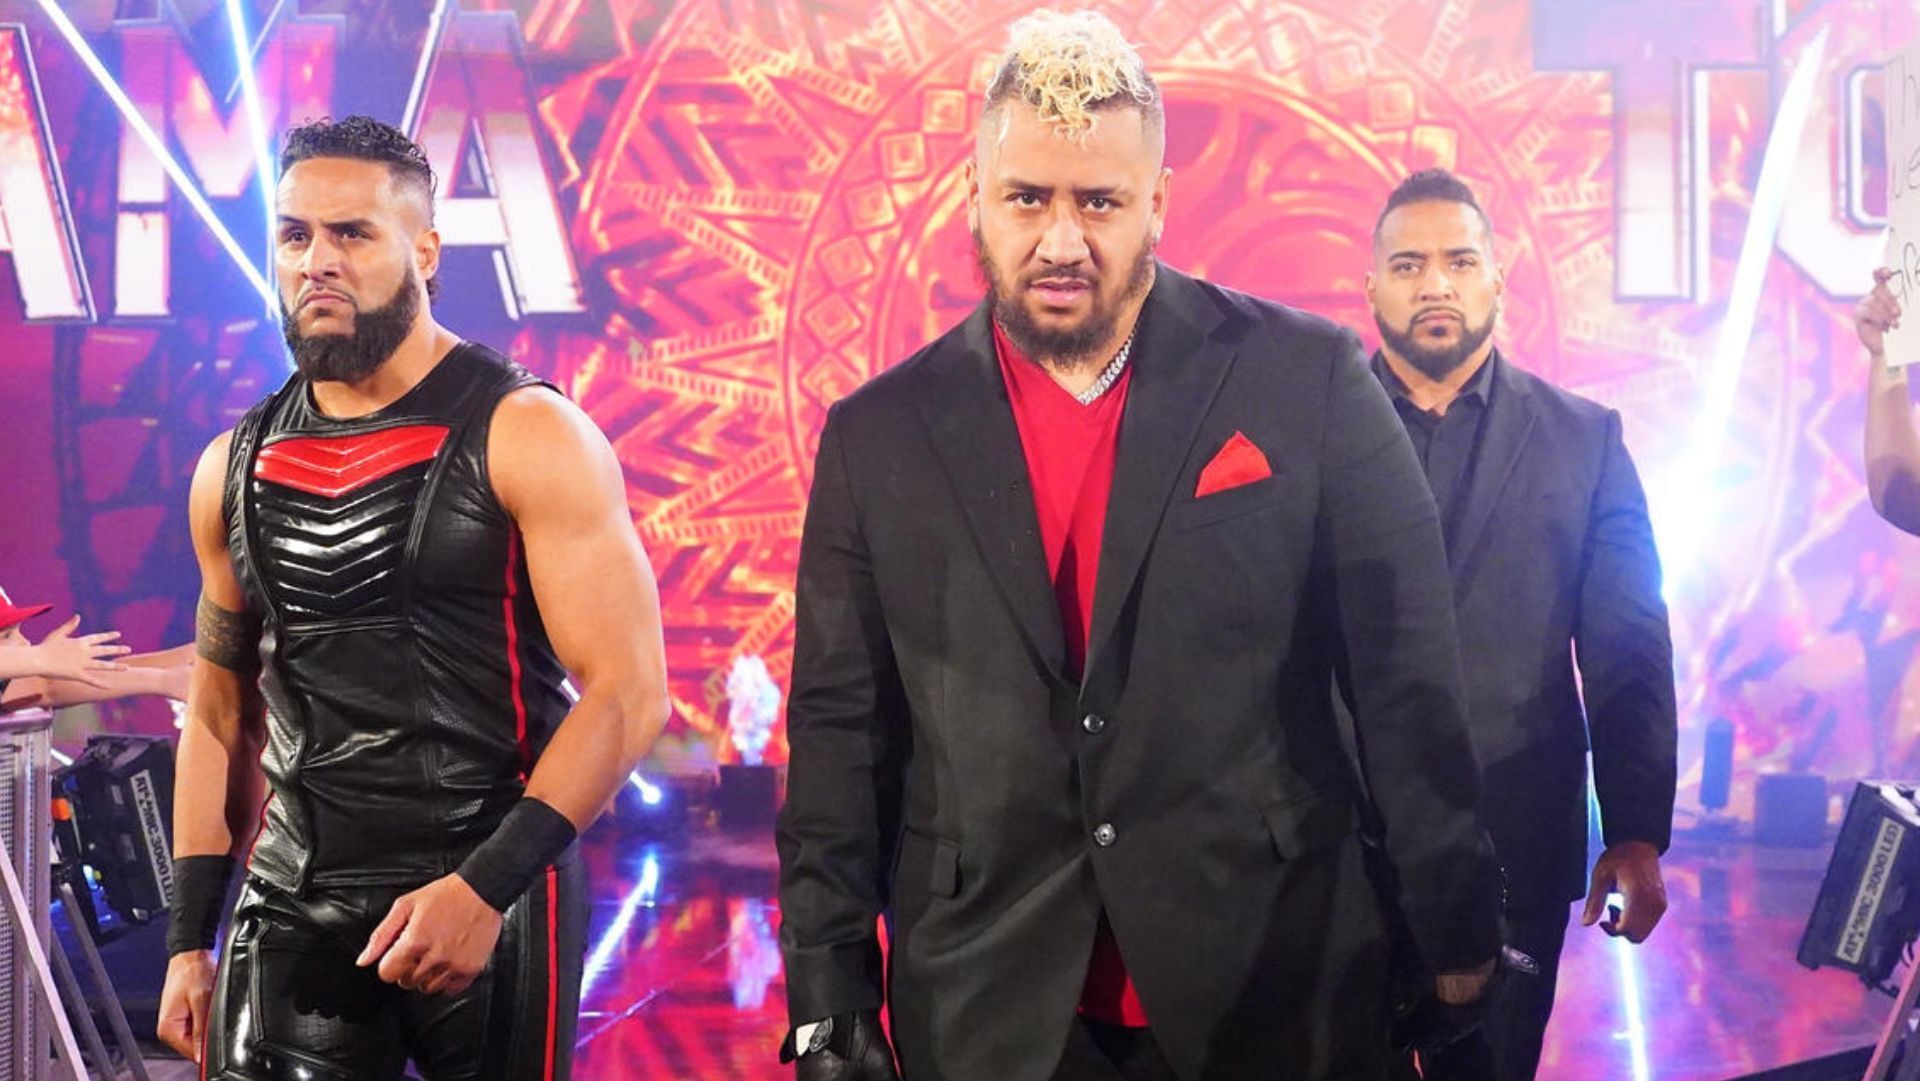 Solo Sikoa has removed Jimmy Uso from The Bloodline.